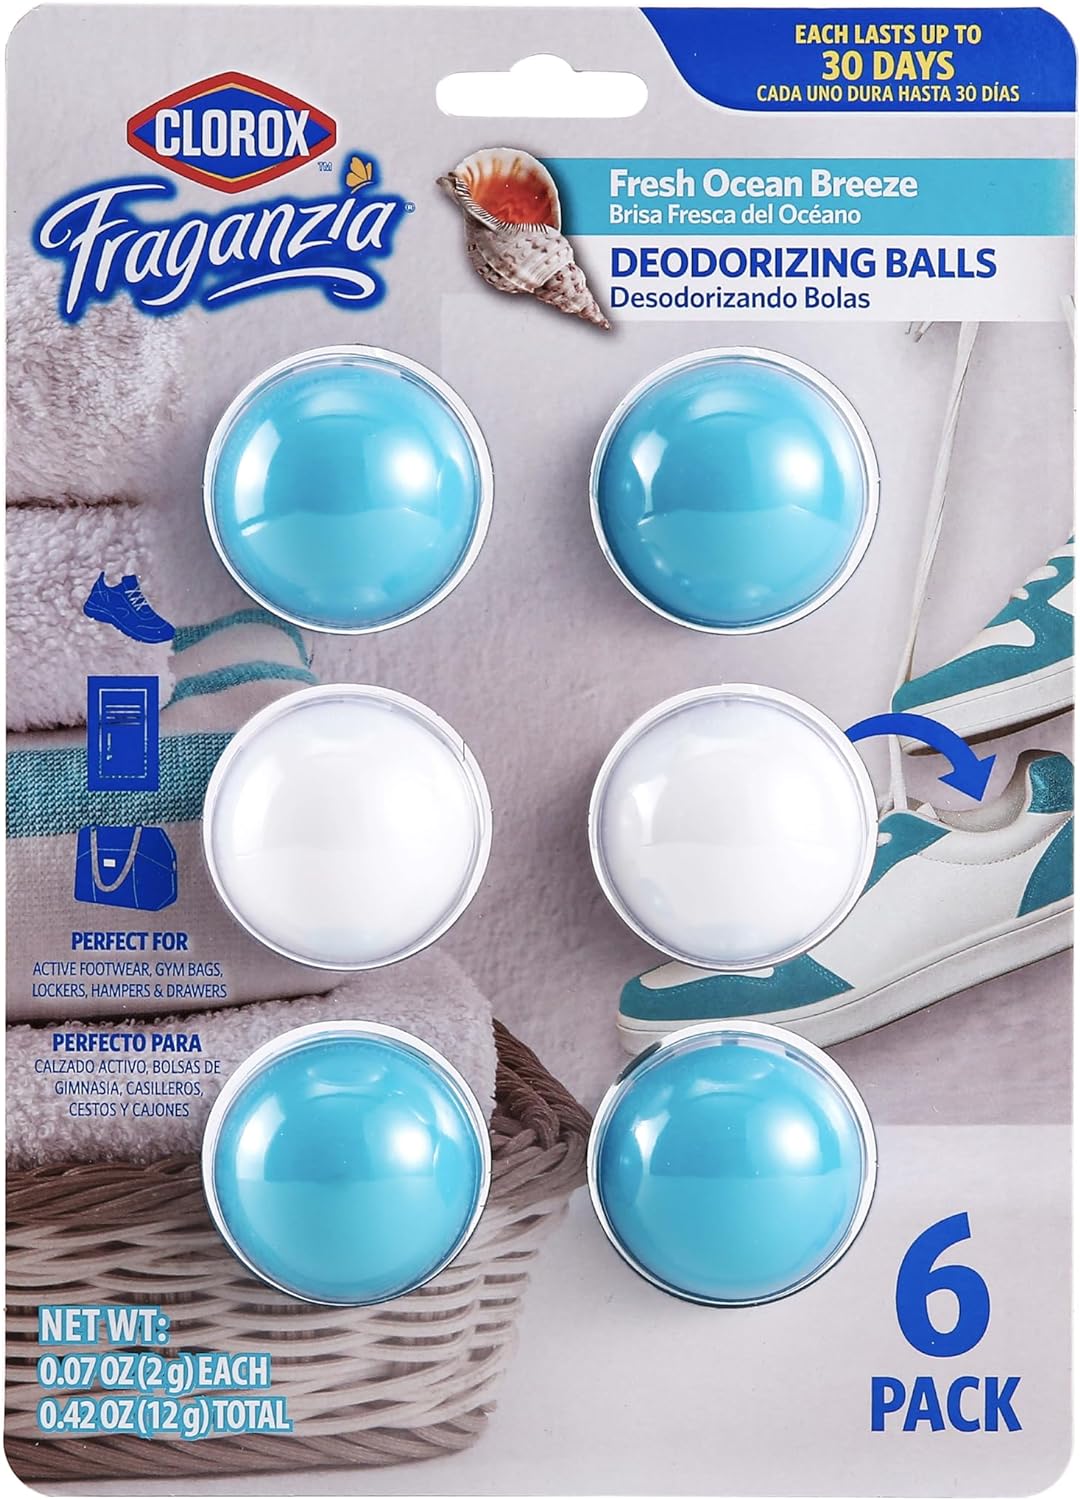 Clorox Fraganzia Deodorizing Balls in Lavender with Eucalyptus, 6 Count - No-Plug, Battery-Free Air Freshener for Shoes, Gym Bags, Lockers, Hampers, and Drawers, 6 Air Freshener Units